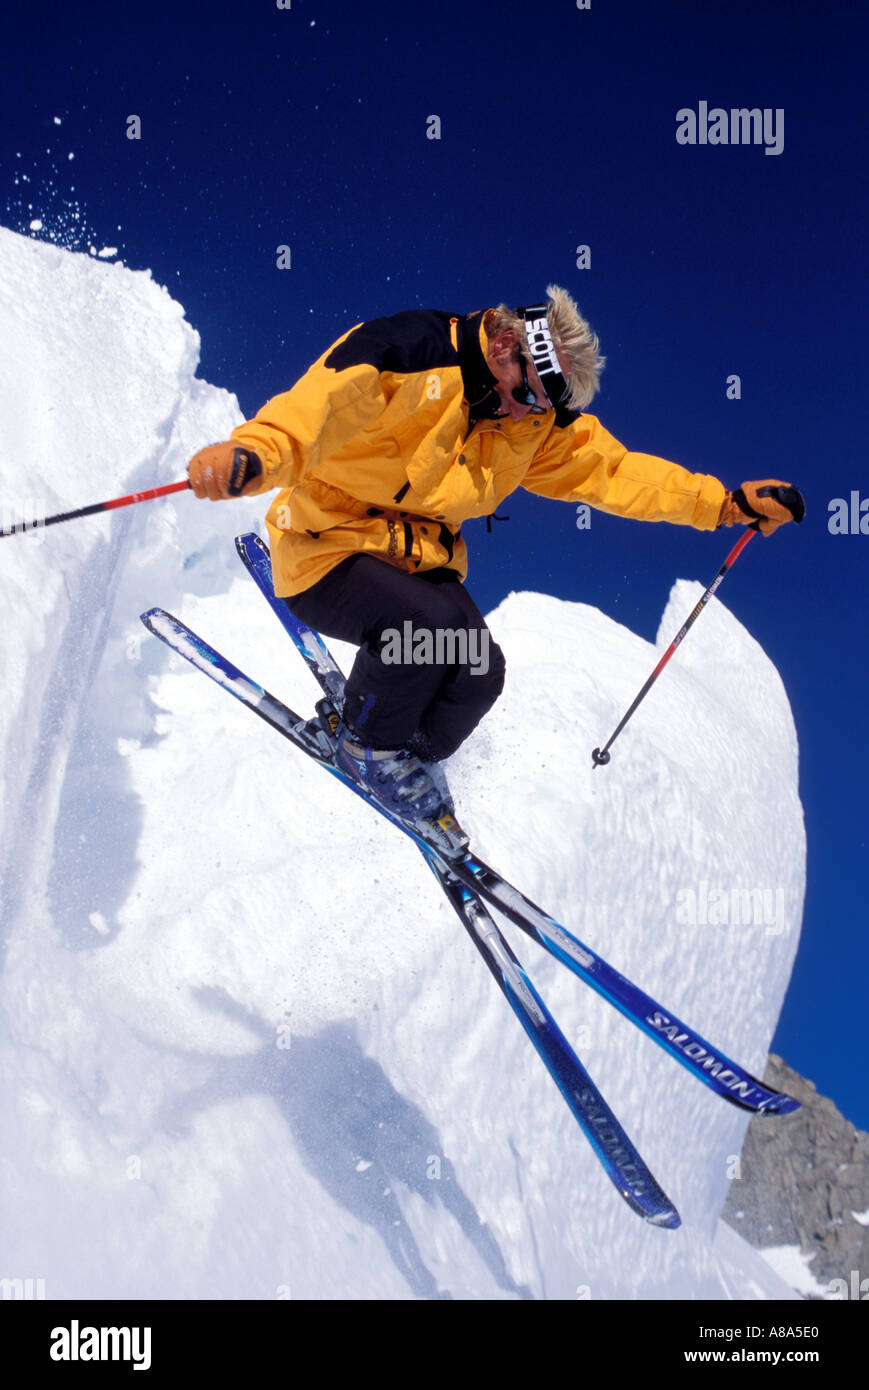 Extreme skier coming off snow ledge at speed  Stock Photo